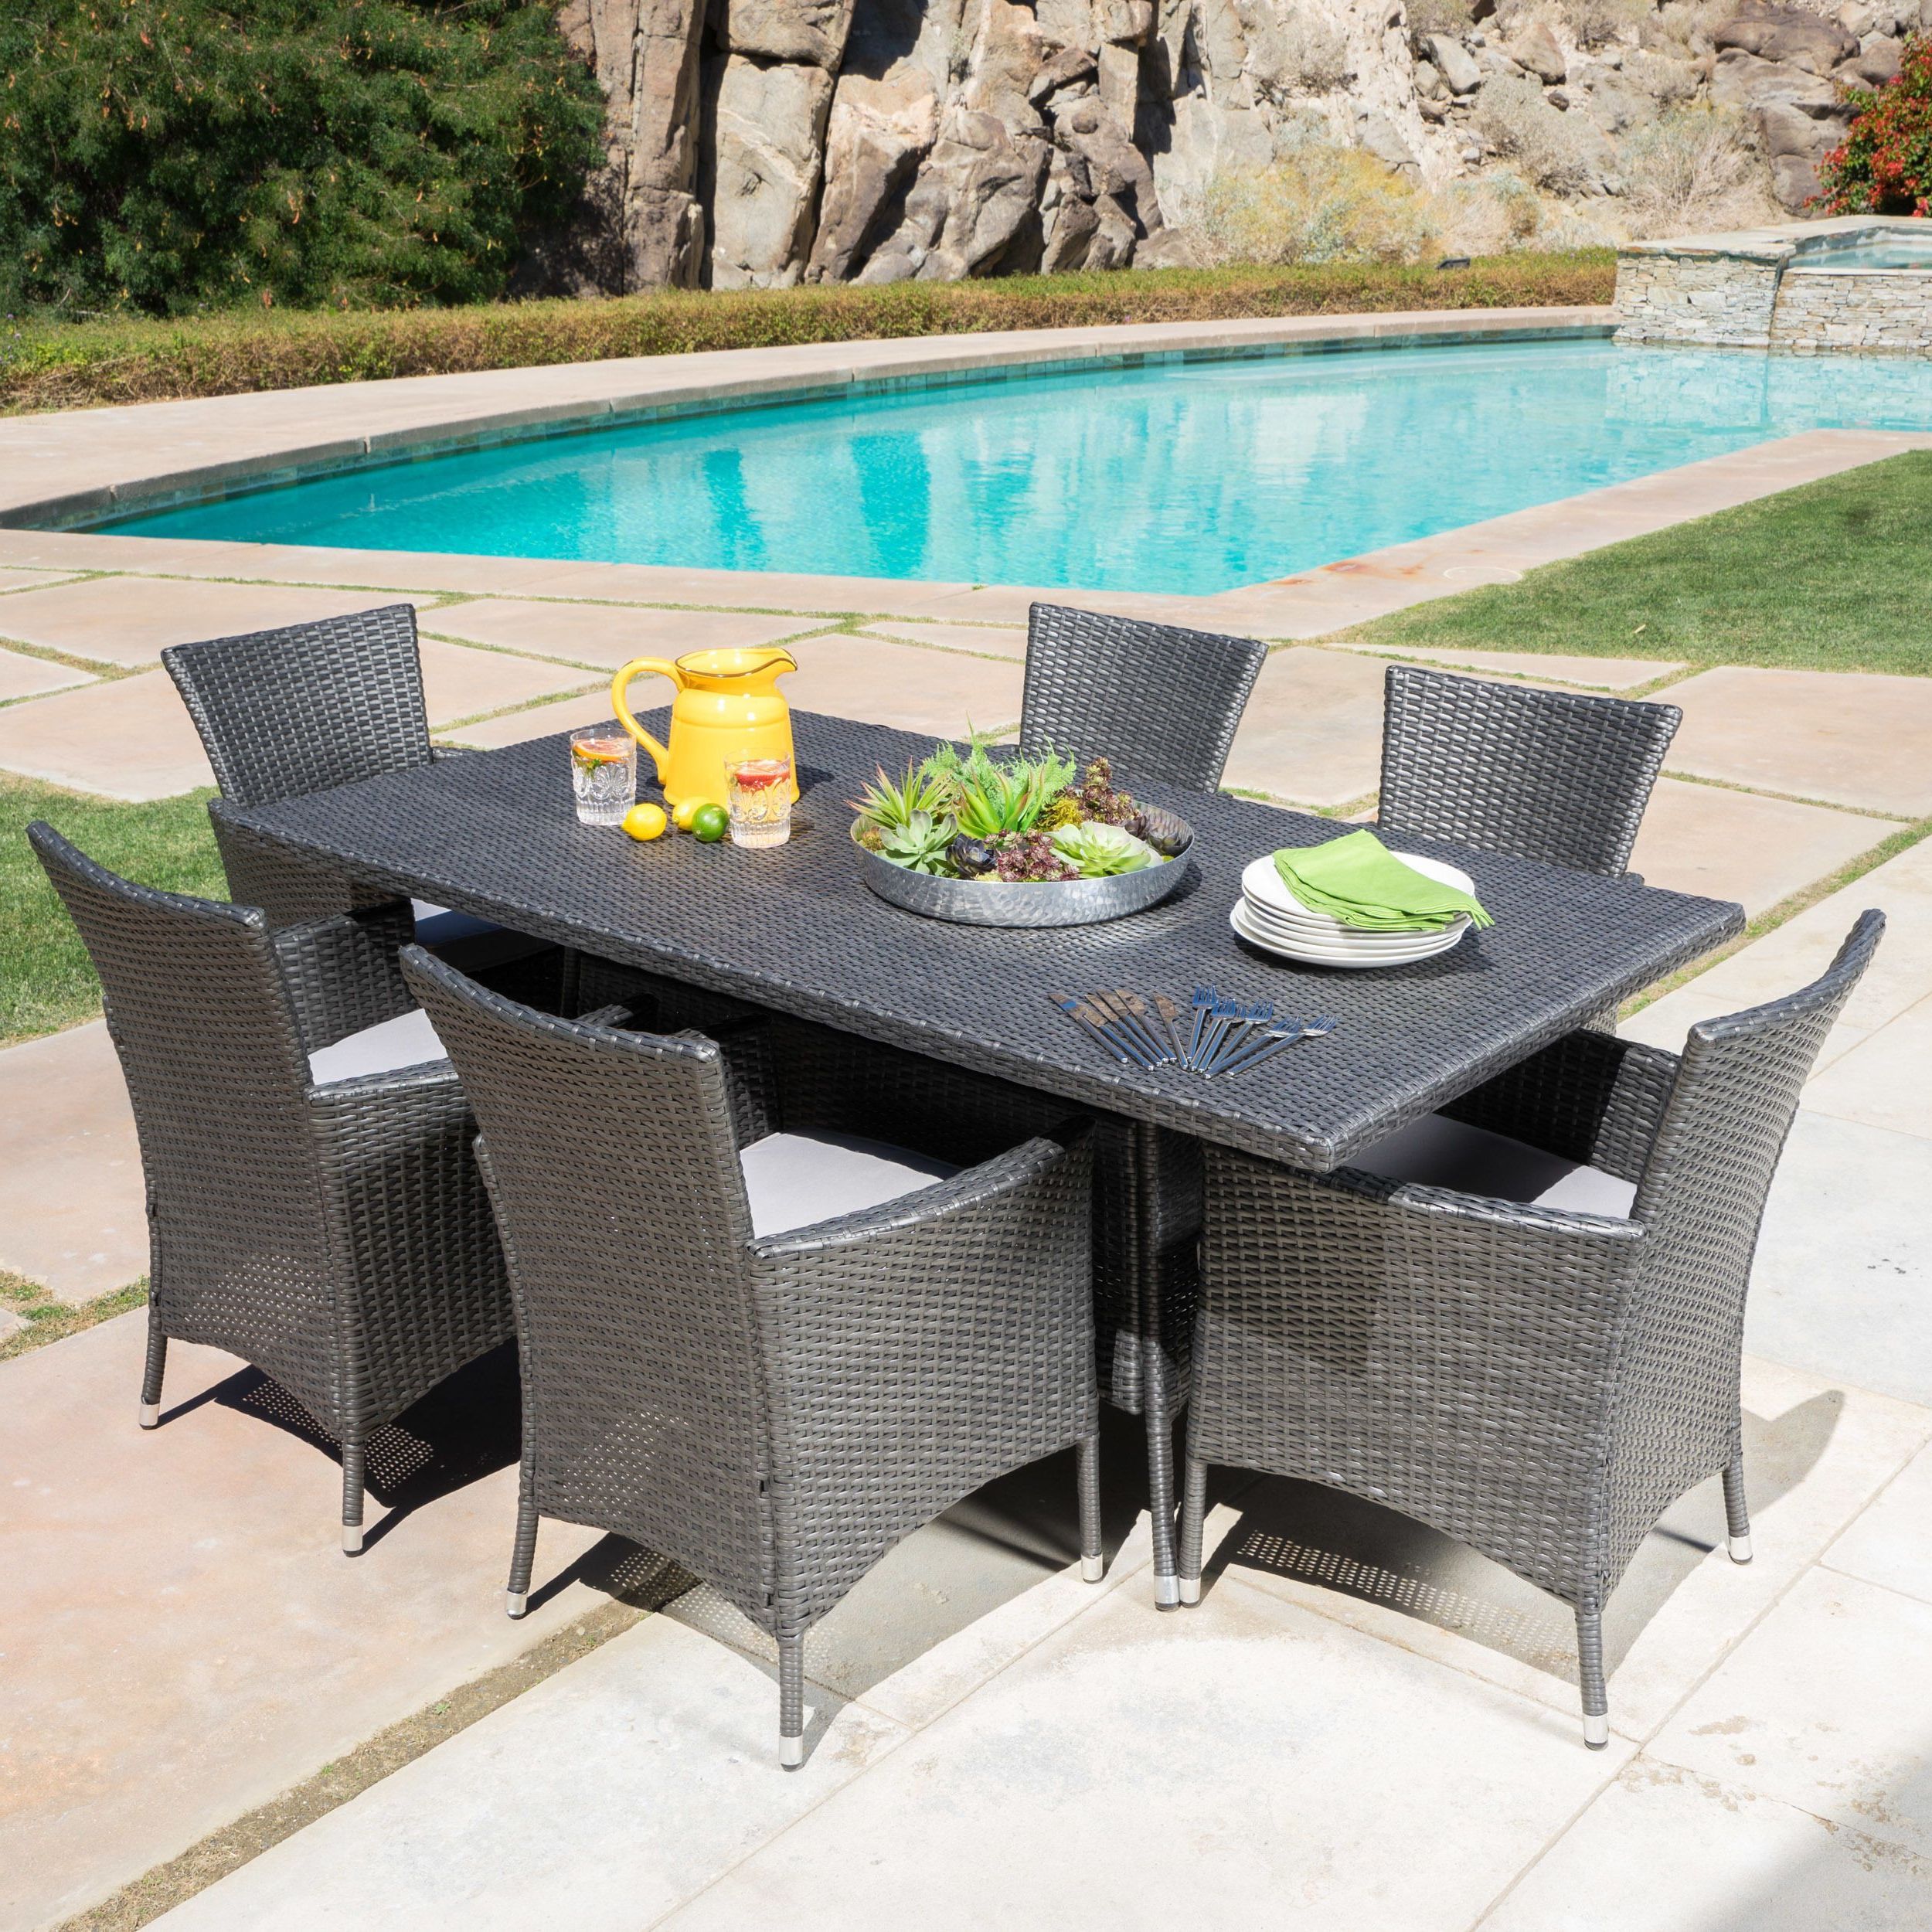 Preferred Malta Outdoor 7 Piece Rectangle Wicker Dining Set With Cushions With Wicker Rectangular Patio Dining Sets (View 6 of 15)